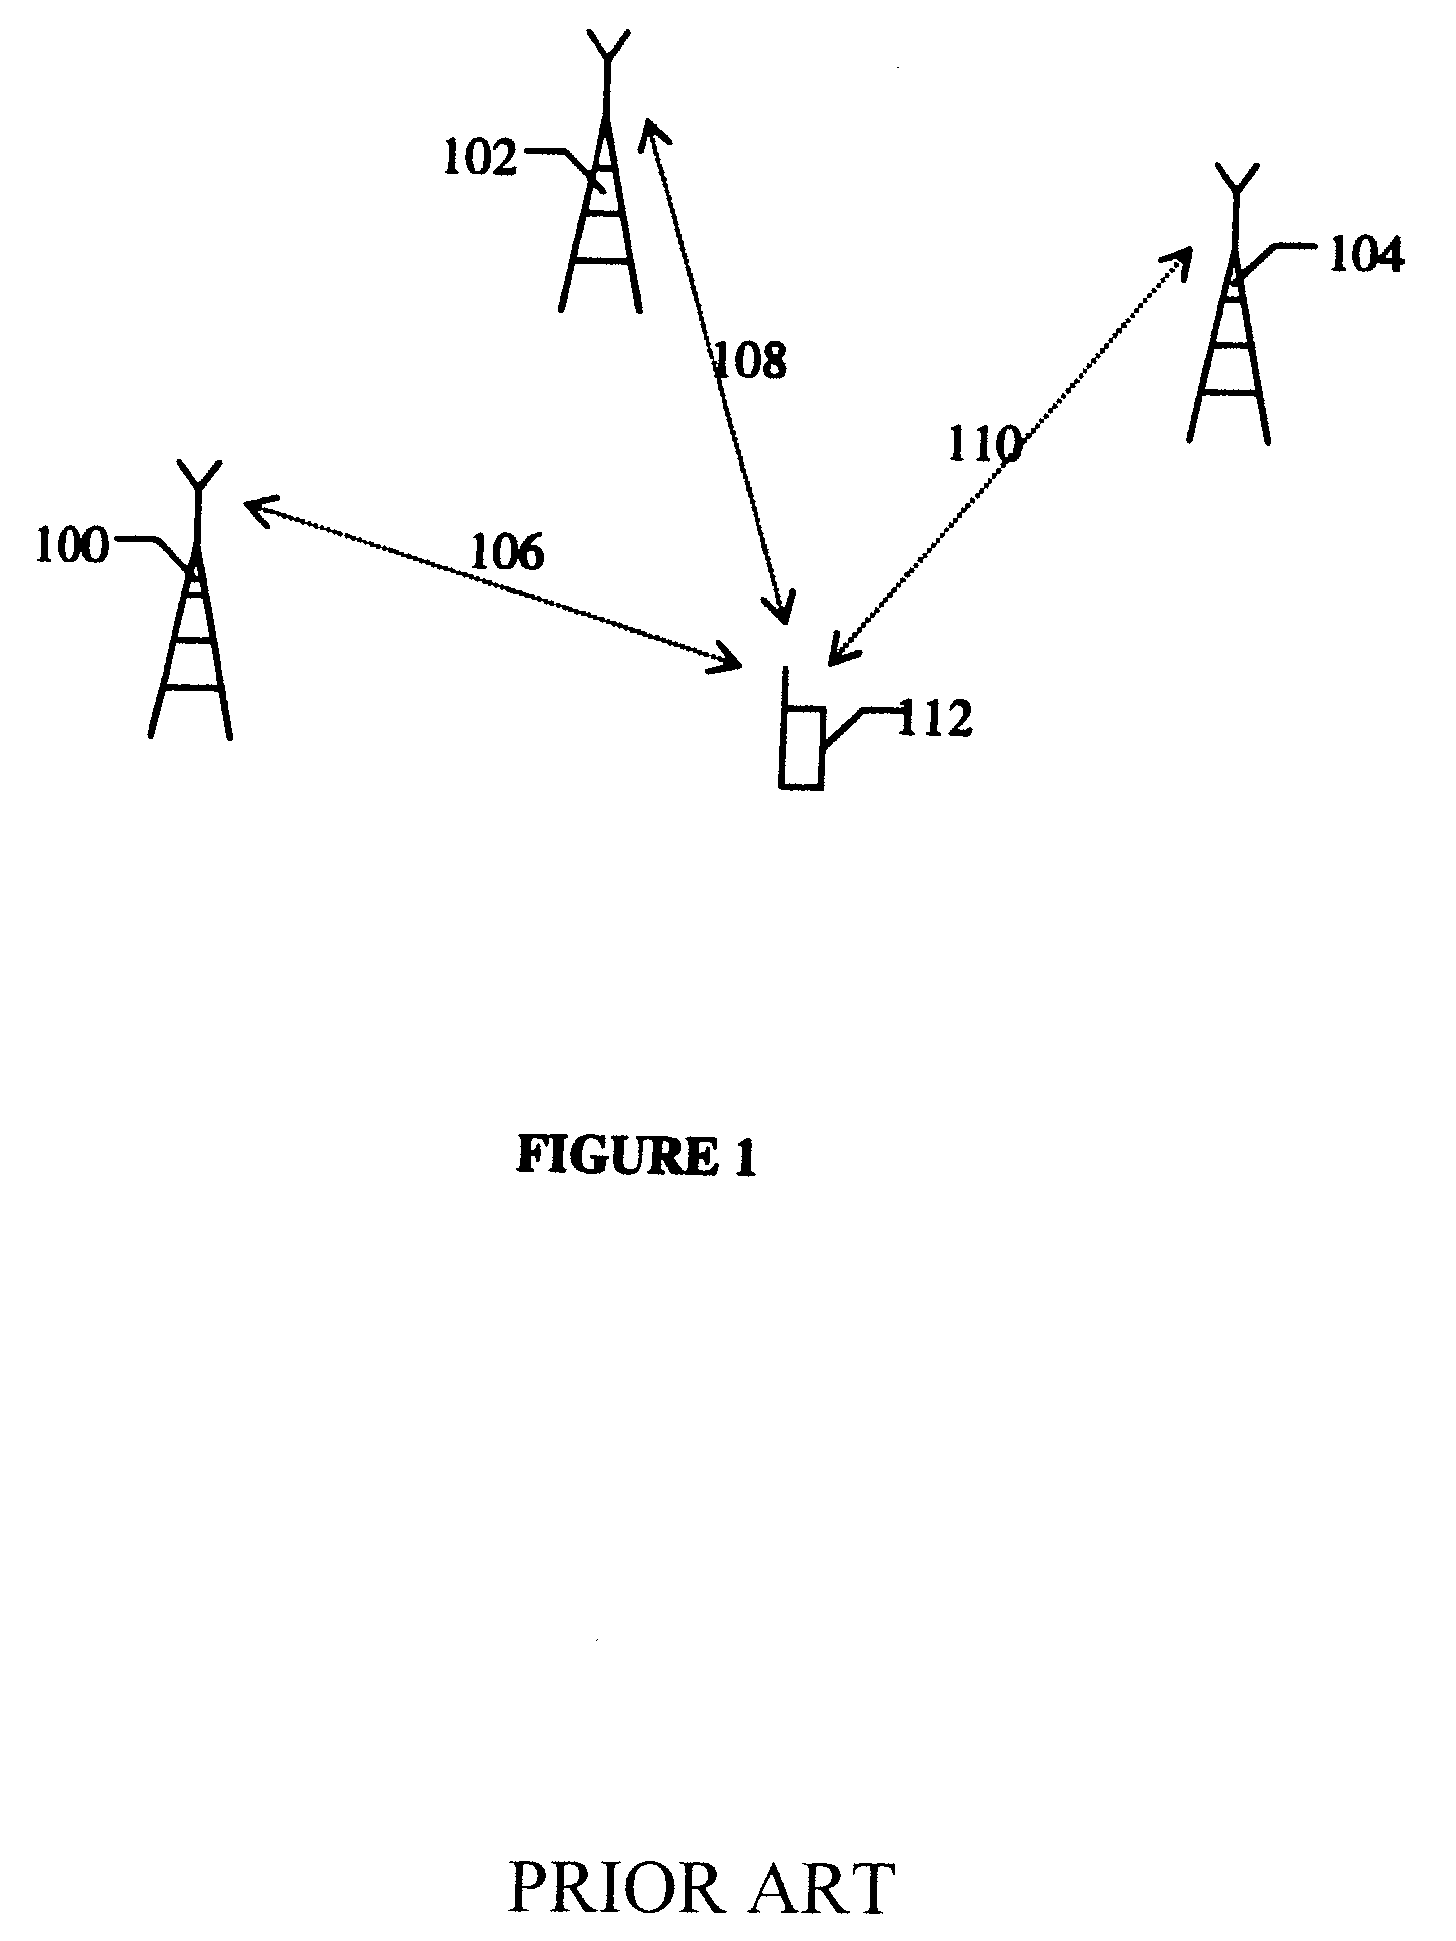 System and method for location determination